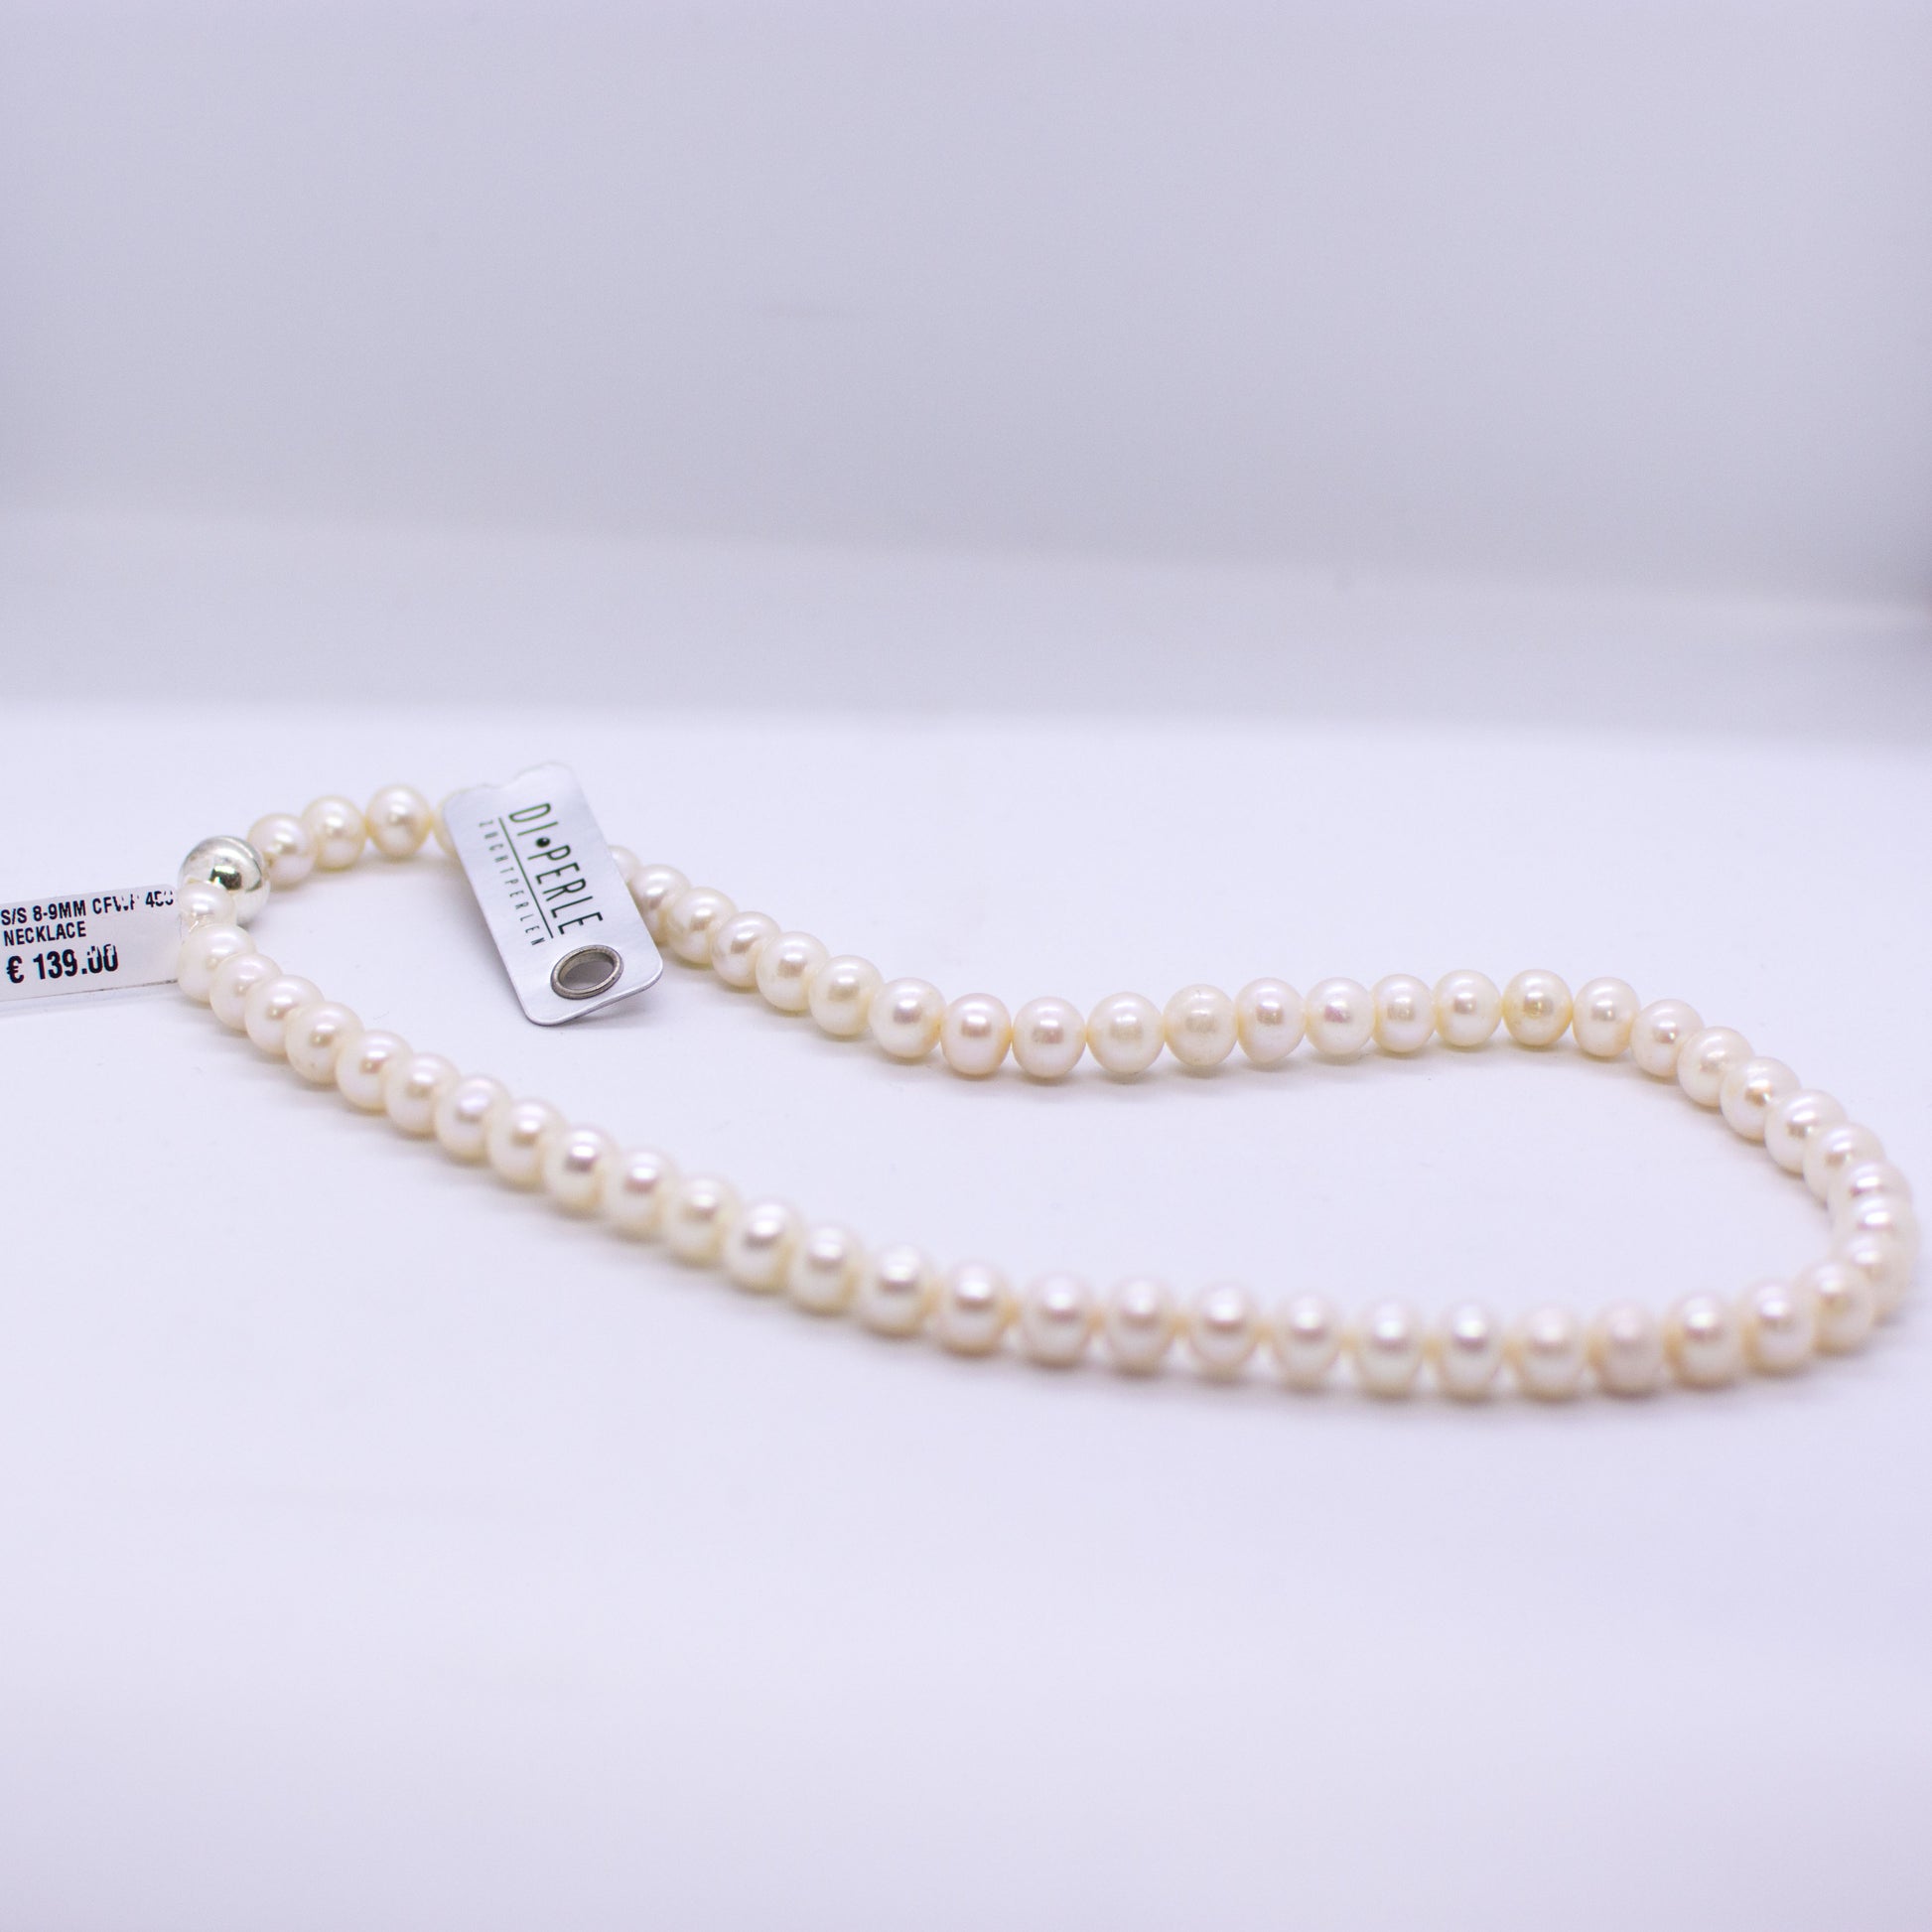 Cultured Freshwater Pearl Necklace - 8-9mm|45cm - John Ross Jewellers